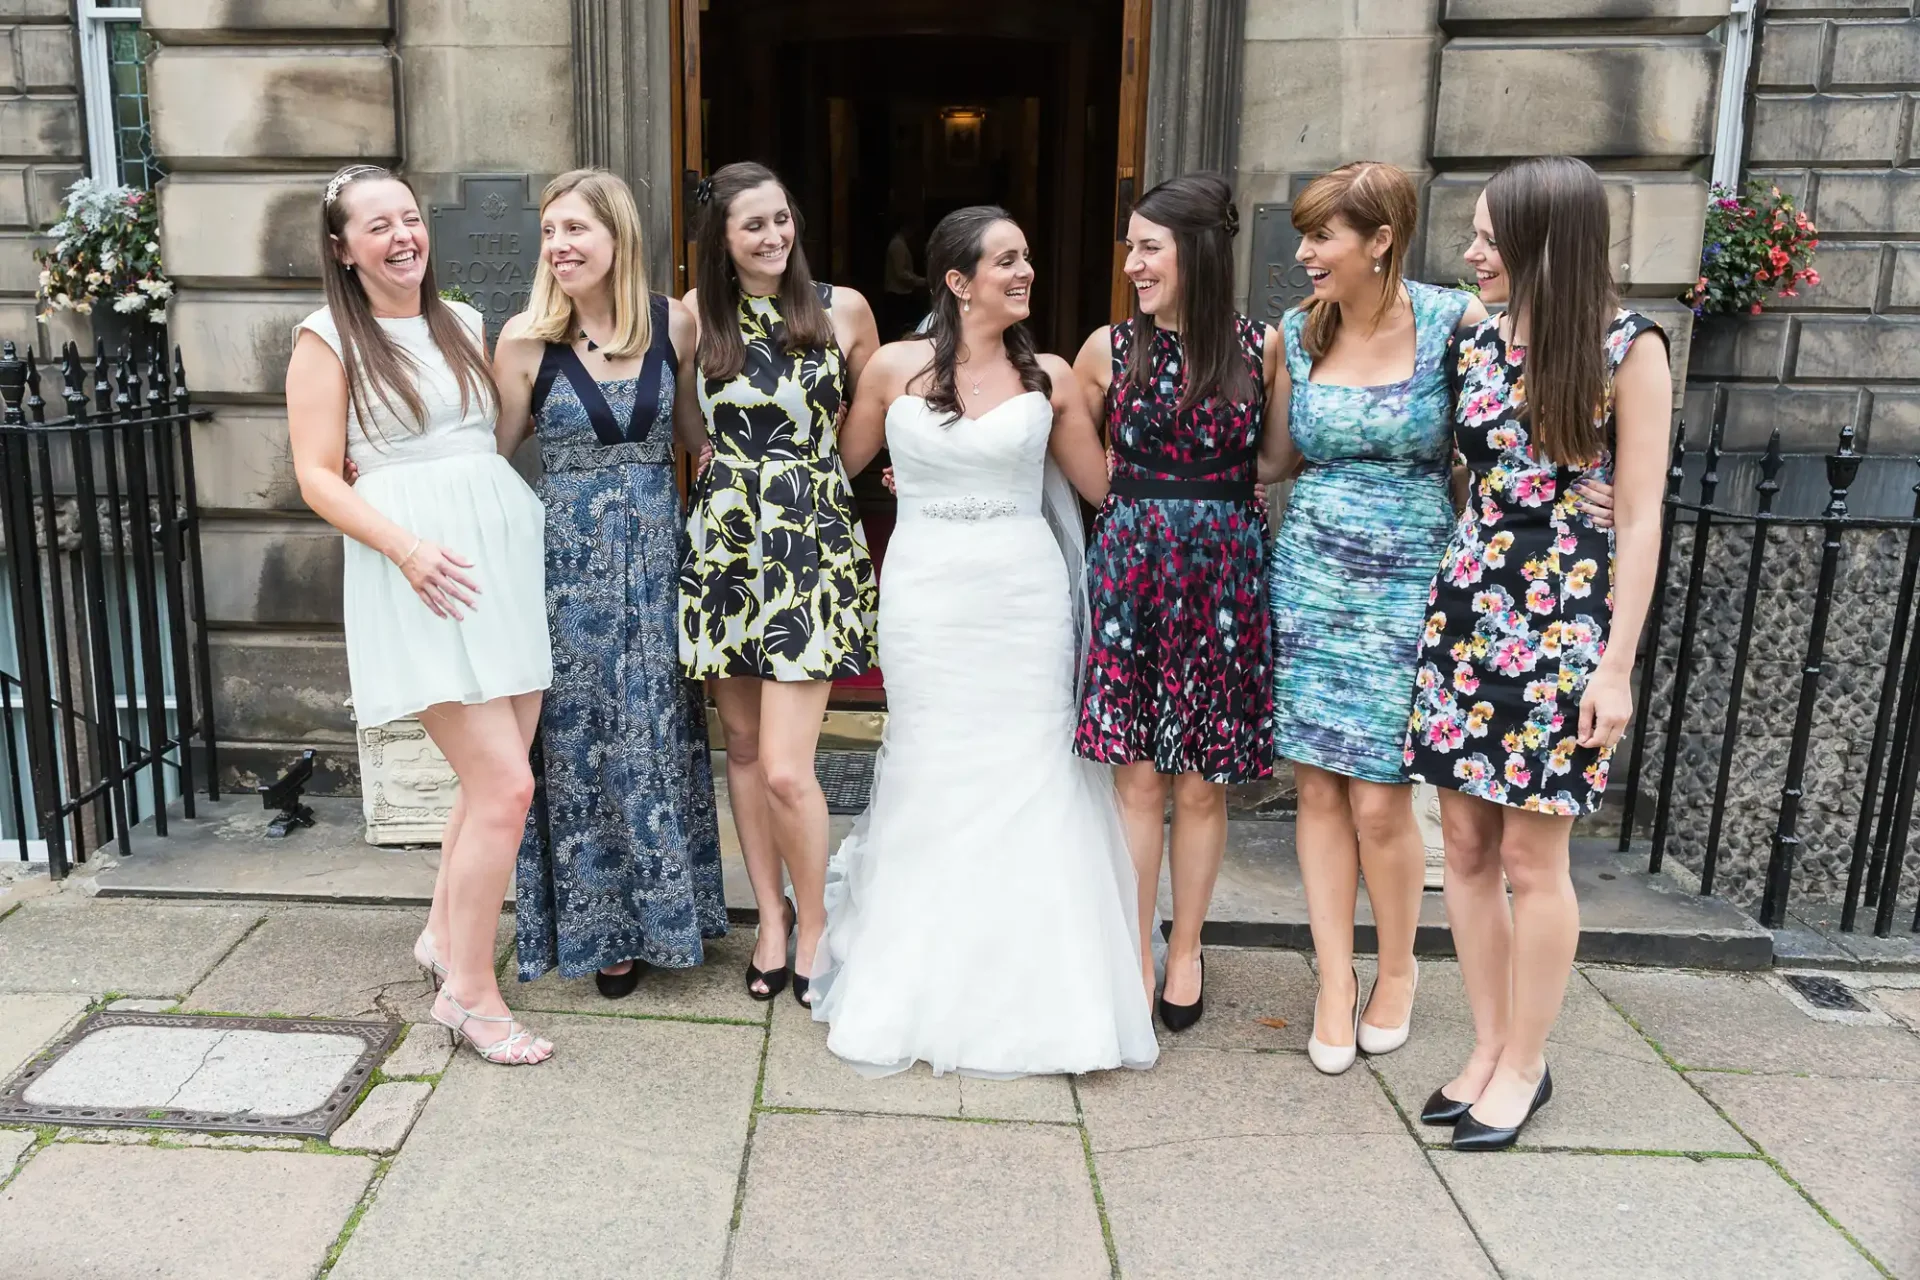 A bride in a white dress and six women in various cocktail dresses pose smiling on a stone walkway outside a building.